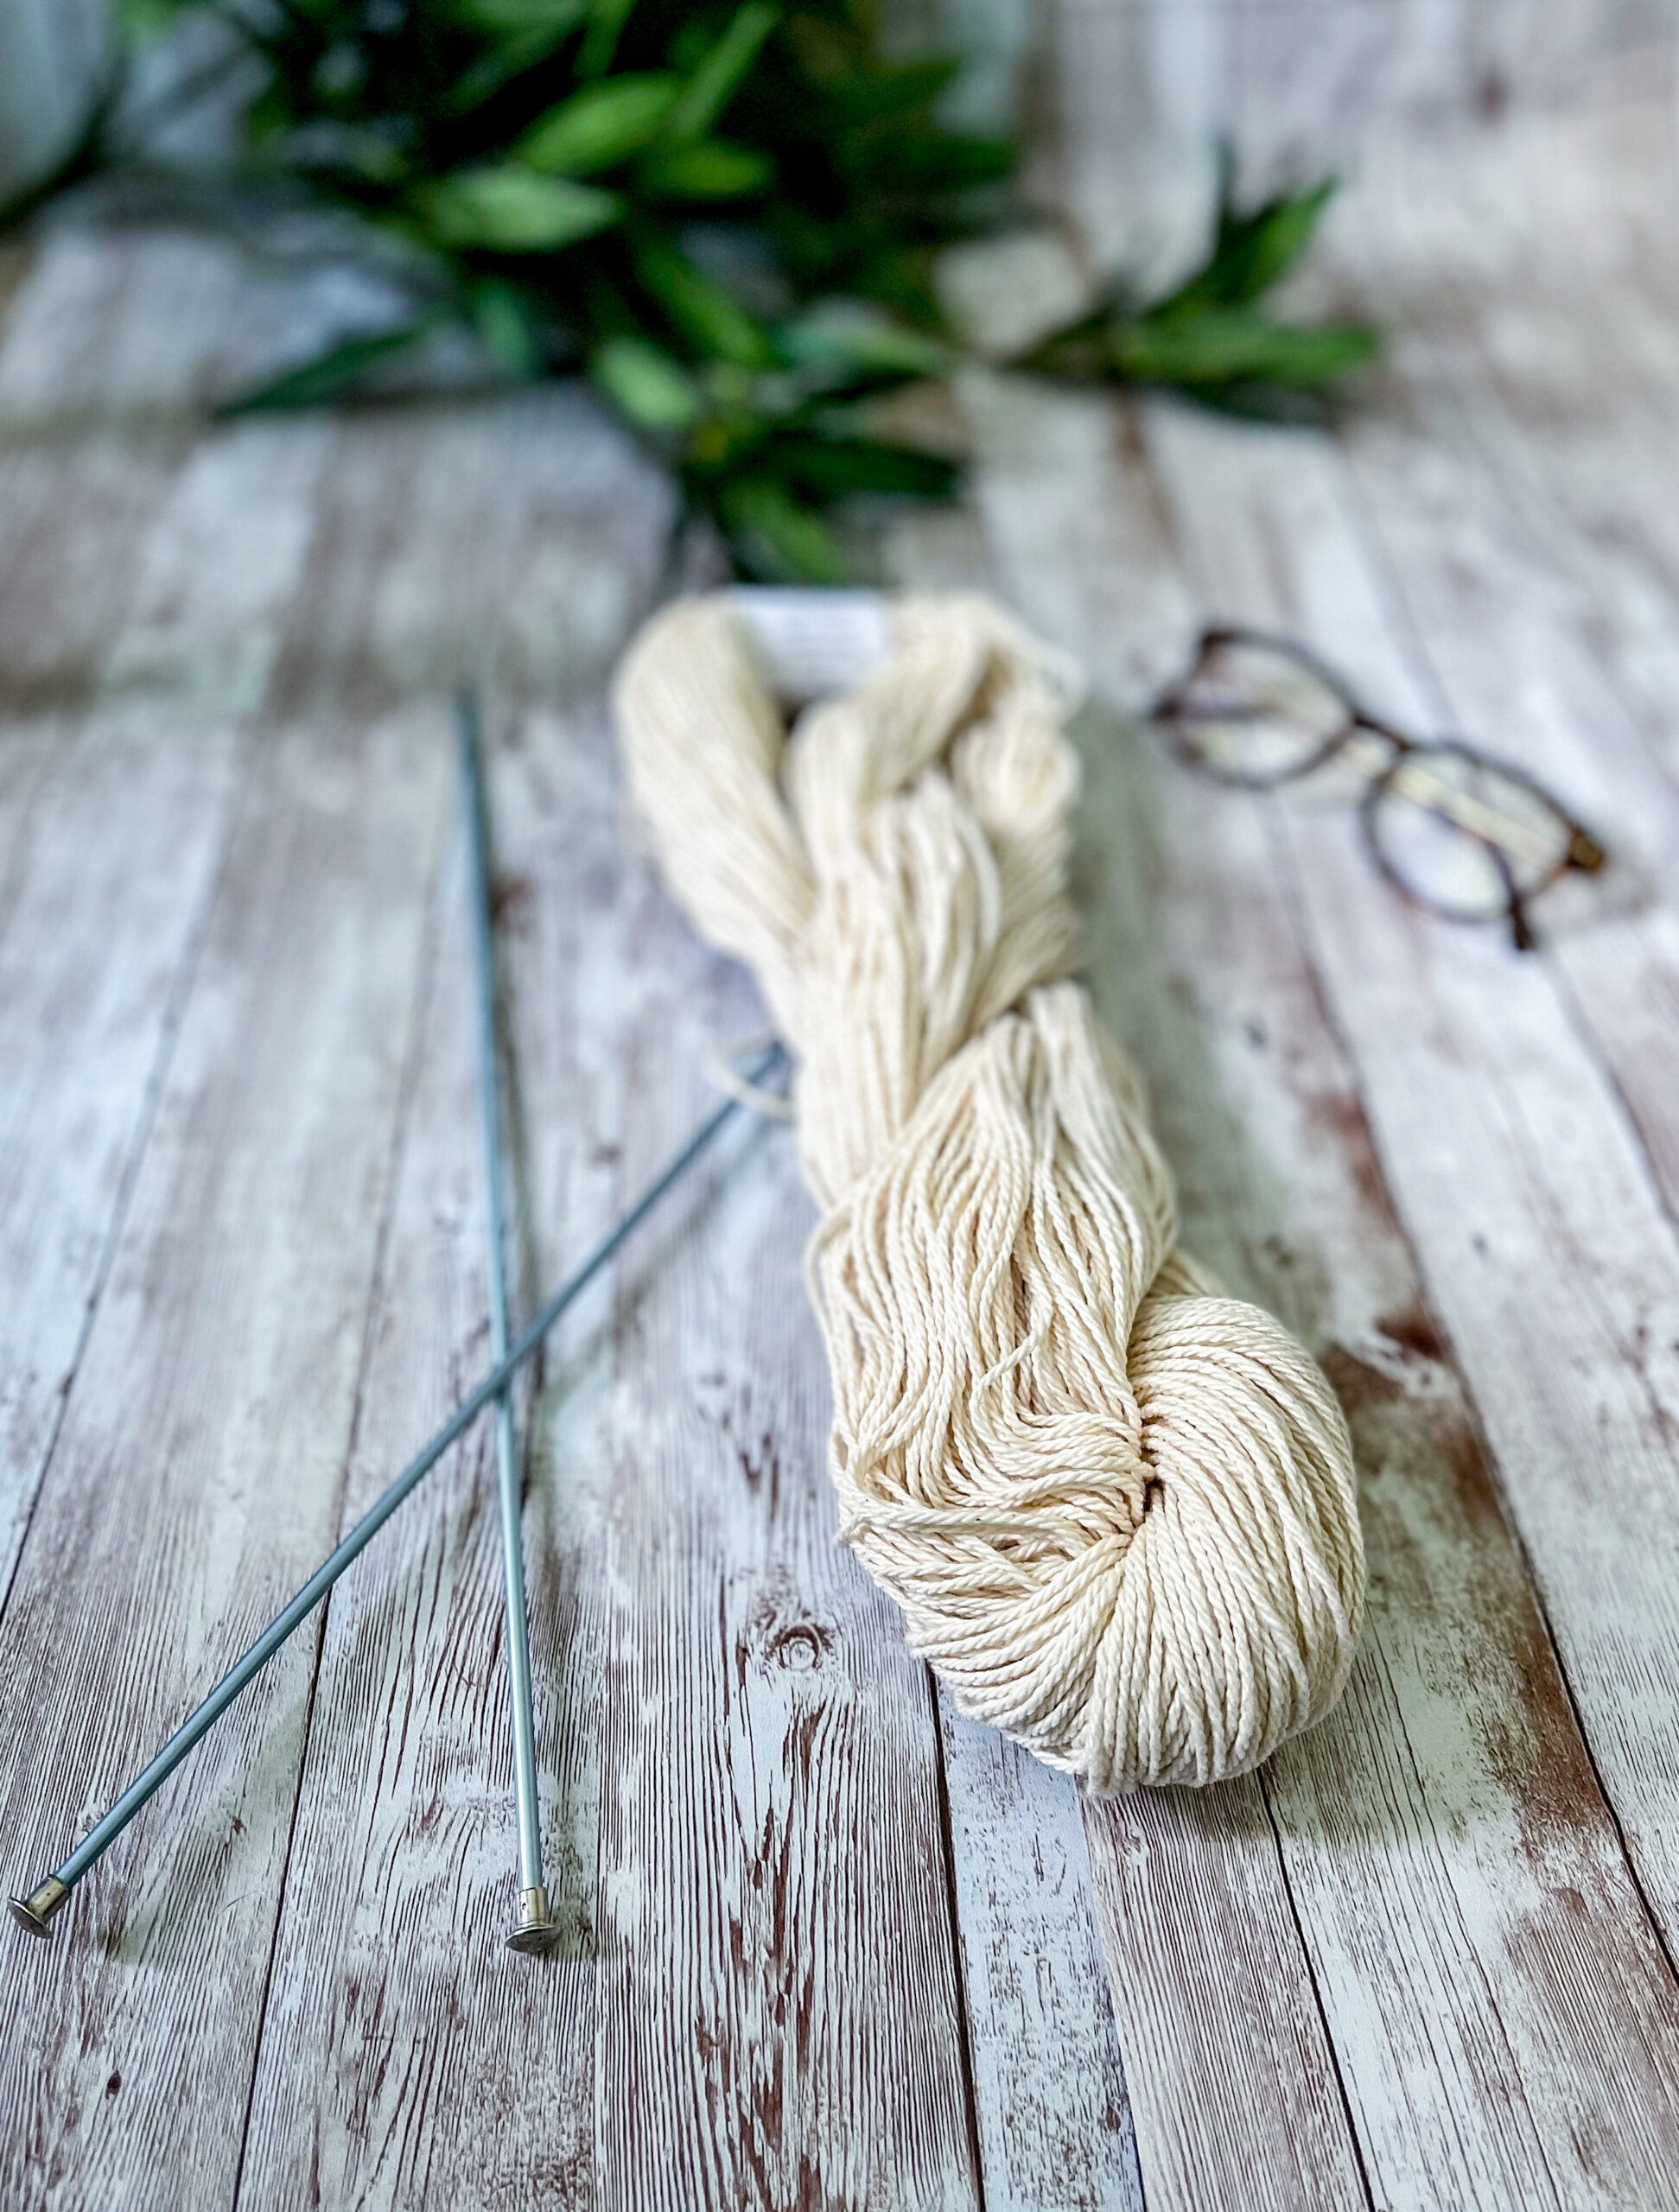 A skein of undyed, off-white Virginia-grown cotton rests on a wood panel, with a pair of knitting needles, reading glasses and greenery around it